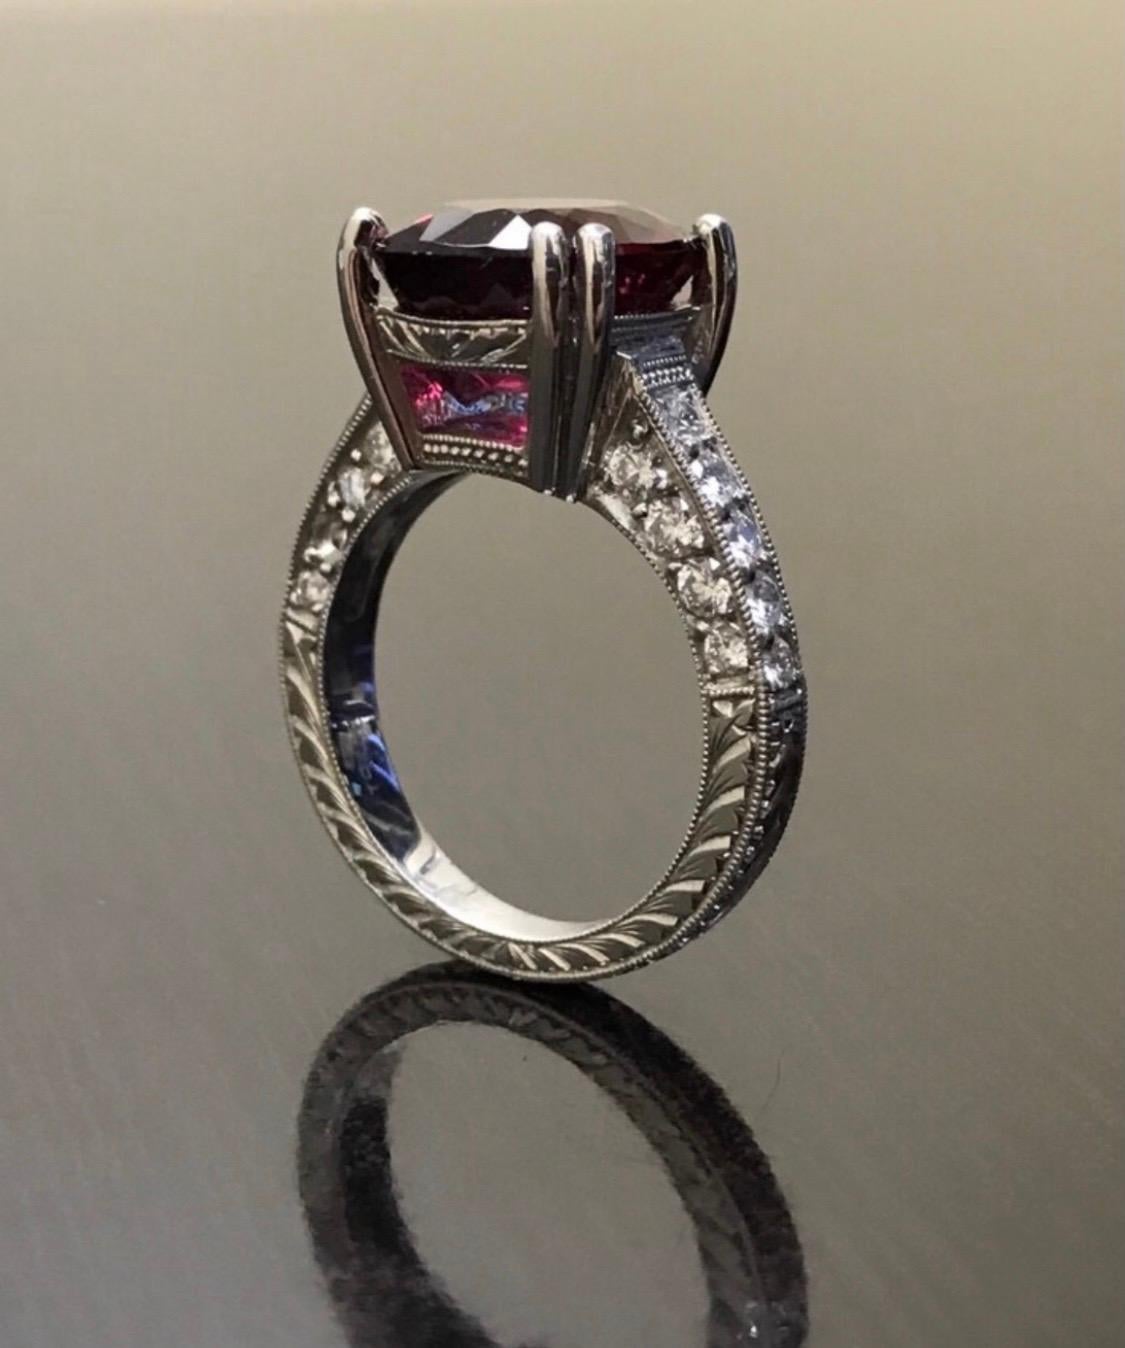 DeKara Design Collection

Metal- 90% Platinum, 10% Iridium, 12.8 Grams.

Stones- 1 Oval Shaped Rubelite 6.70 Carats, 26 Round Diamonds G Color VS1 Clarity, 1.10 Carats.

A big and heavy but extremely beautiful Art Deco influenced 6.70 Rubelite